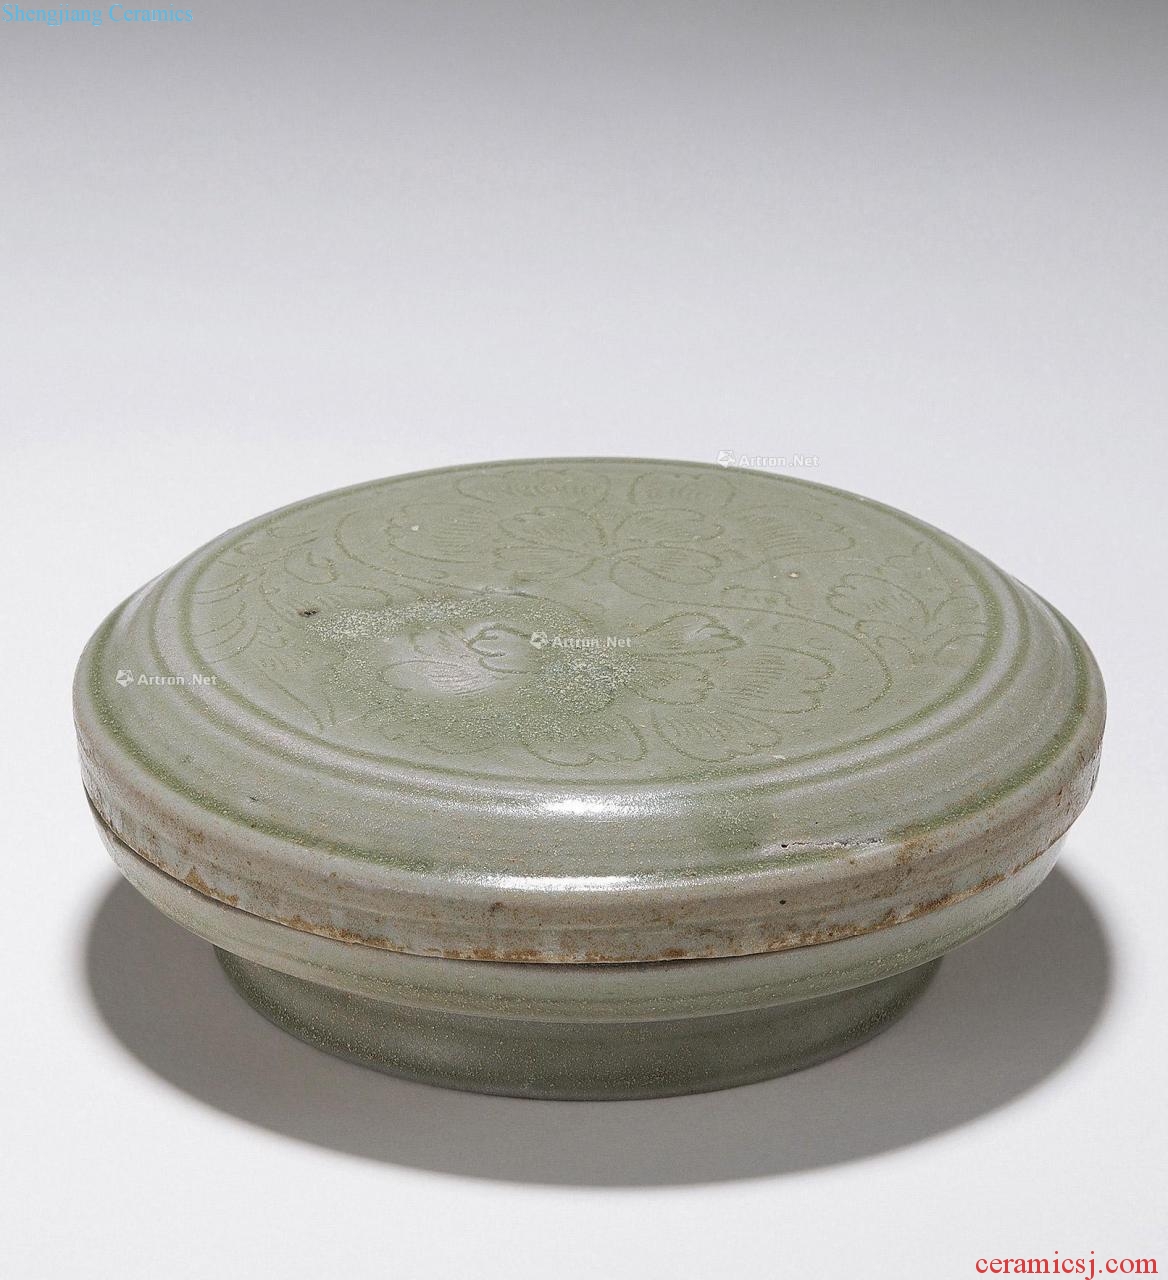 The five dynasties to northern song dynasty yue state kiln carved powder compact